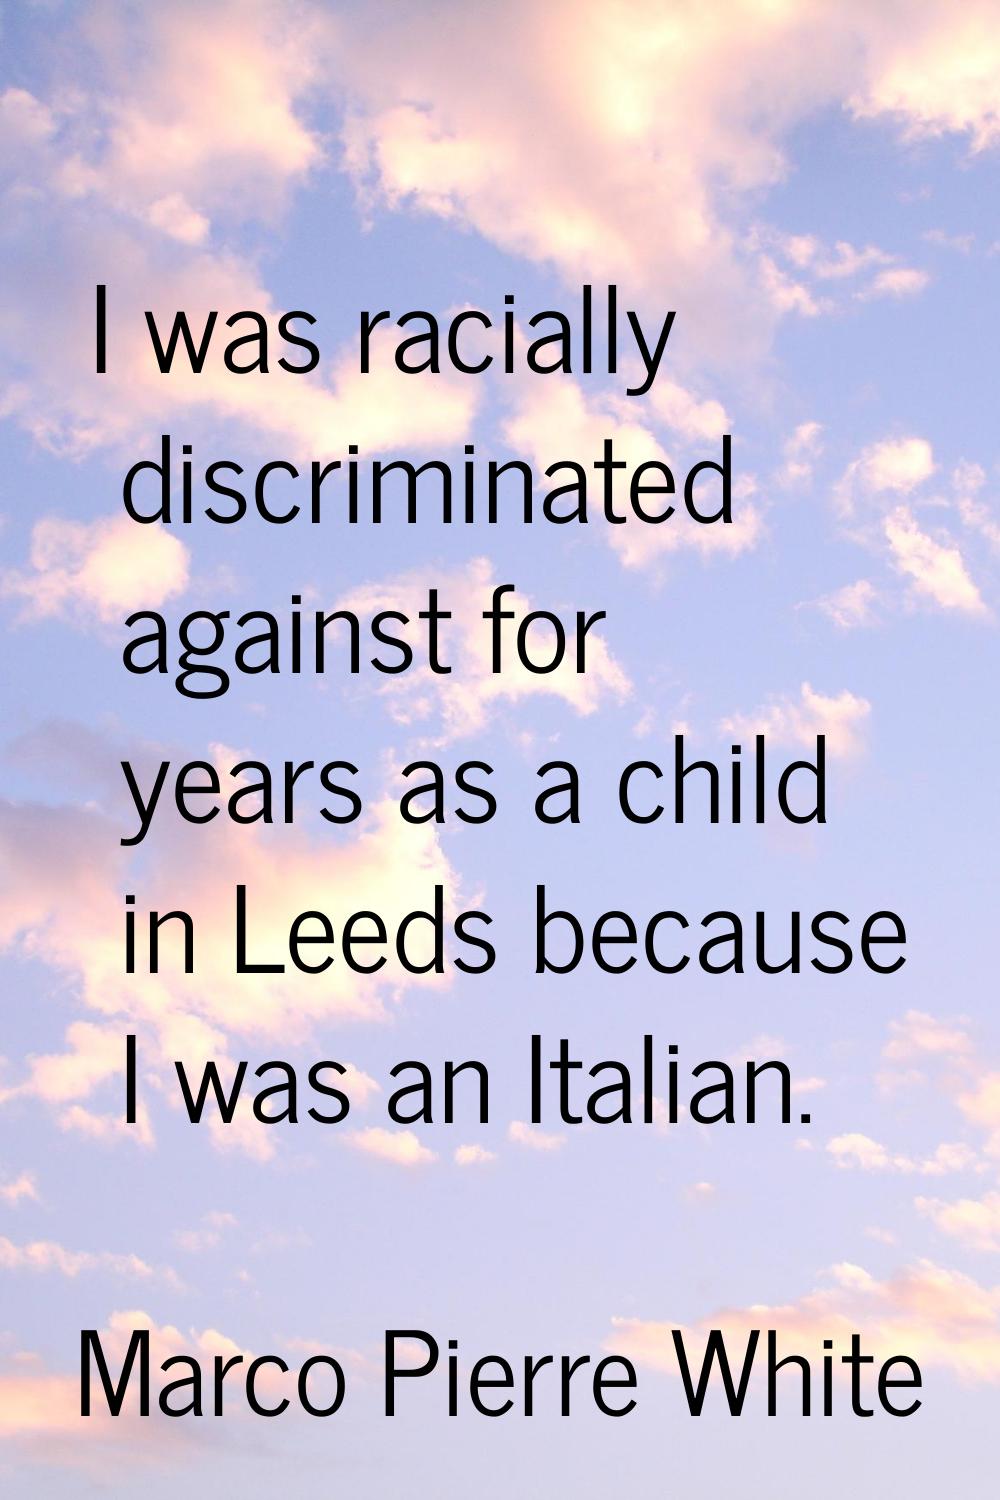 I was racially discriminated against for years as a child in Leeds because I was an Italian.